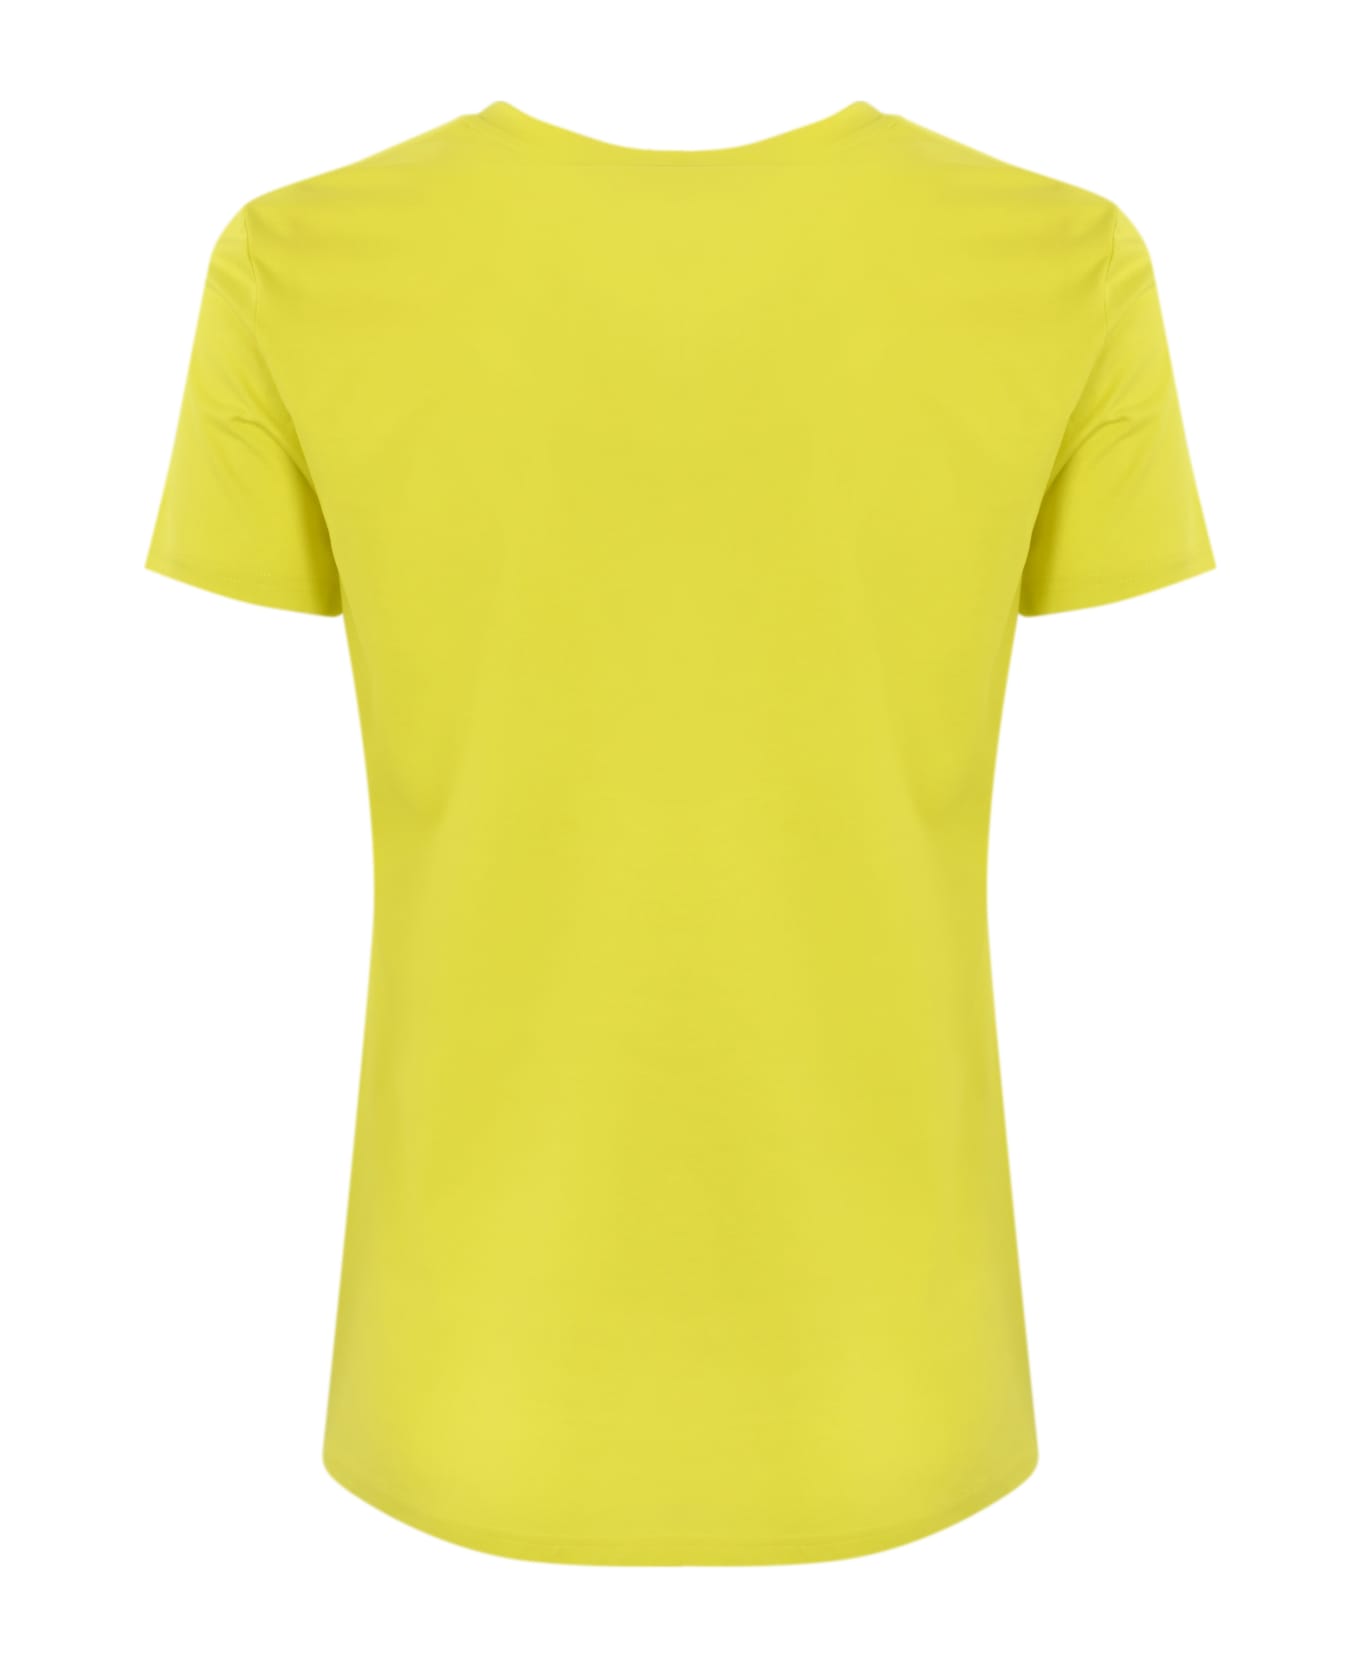 Max Mara Studio Cotton T-shirt With Feathers - Limone